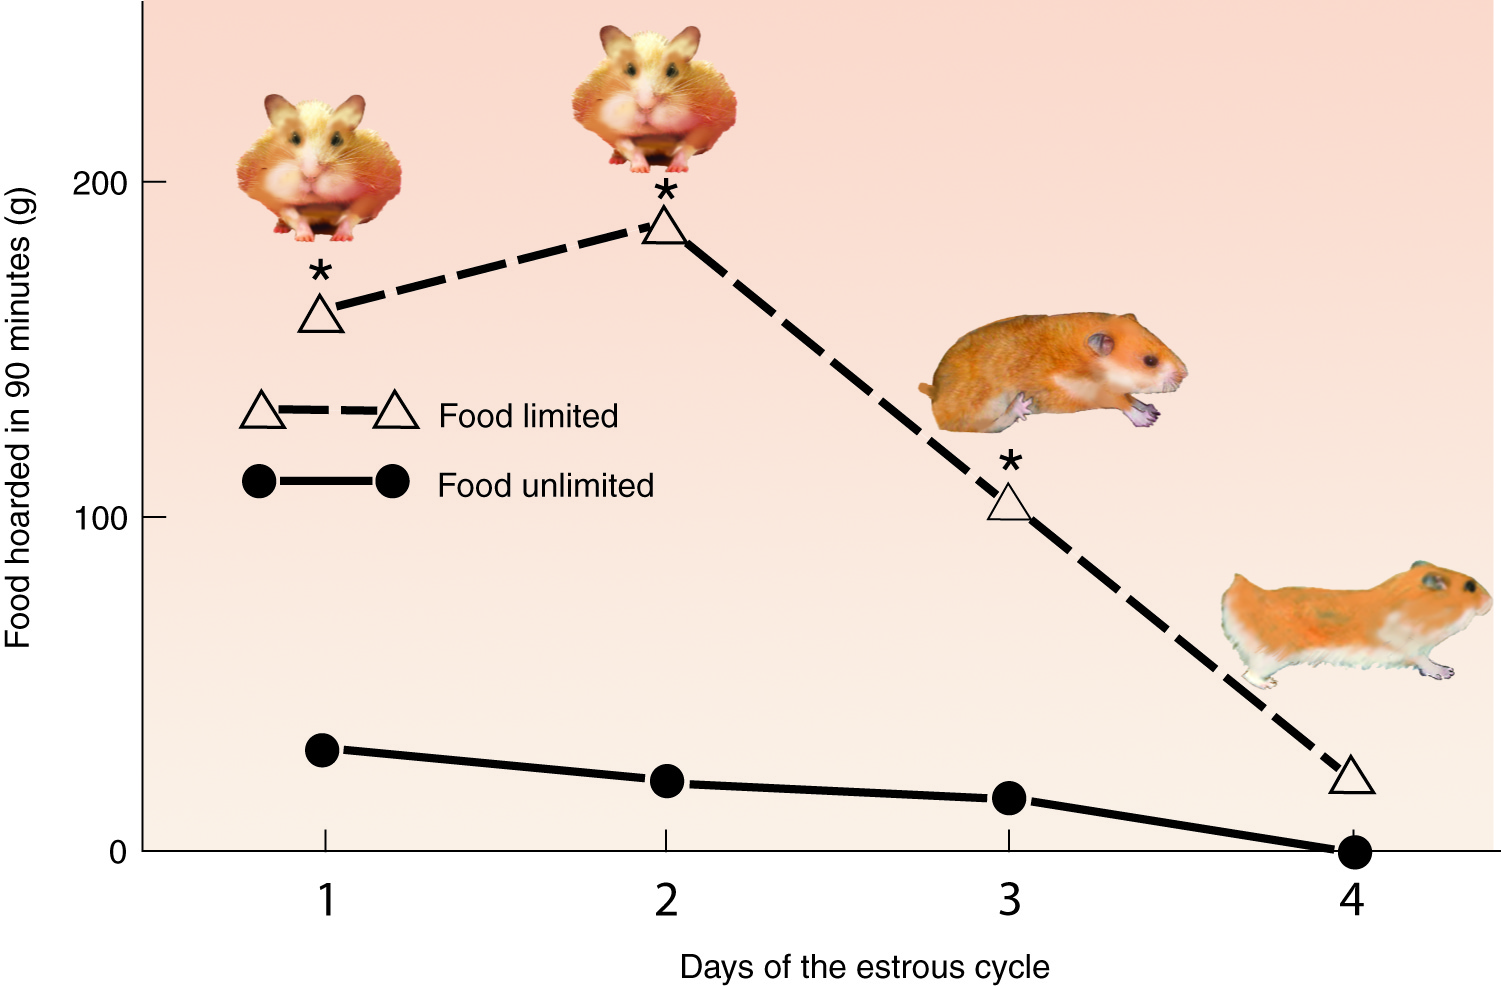 Life Cycle of Hamsters